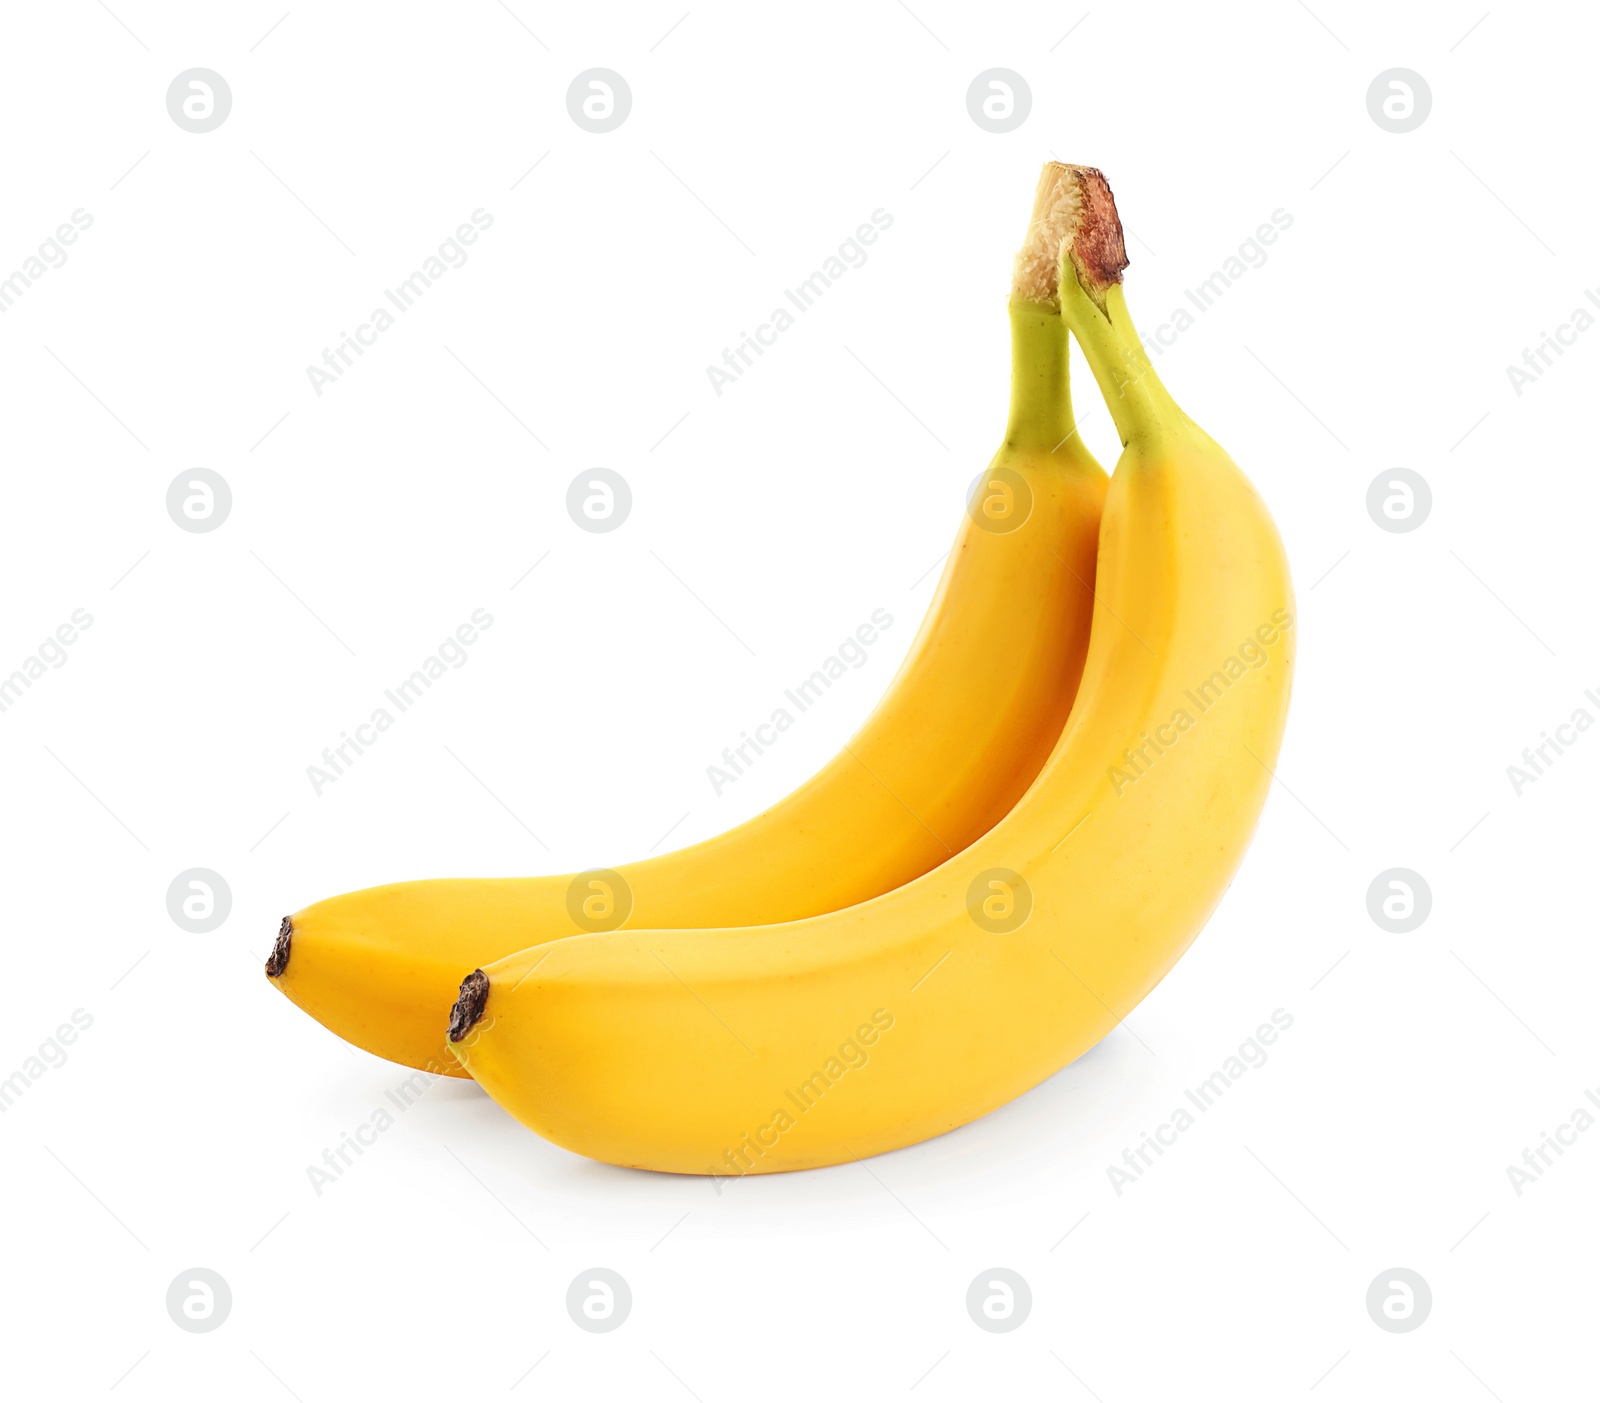 Image of Two delicious ripe banana isolated on white